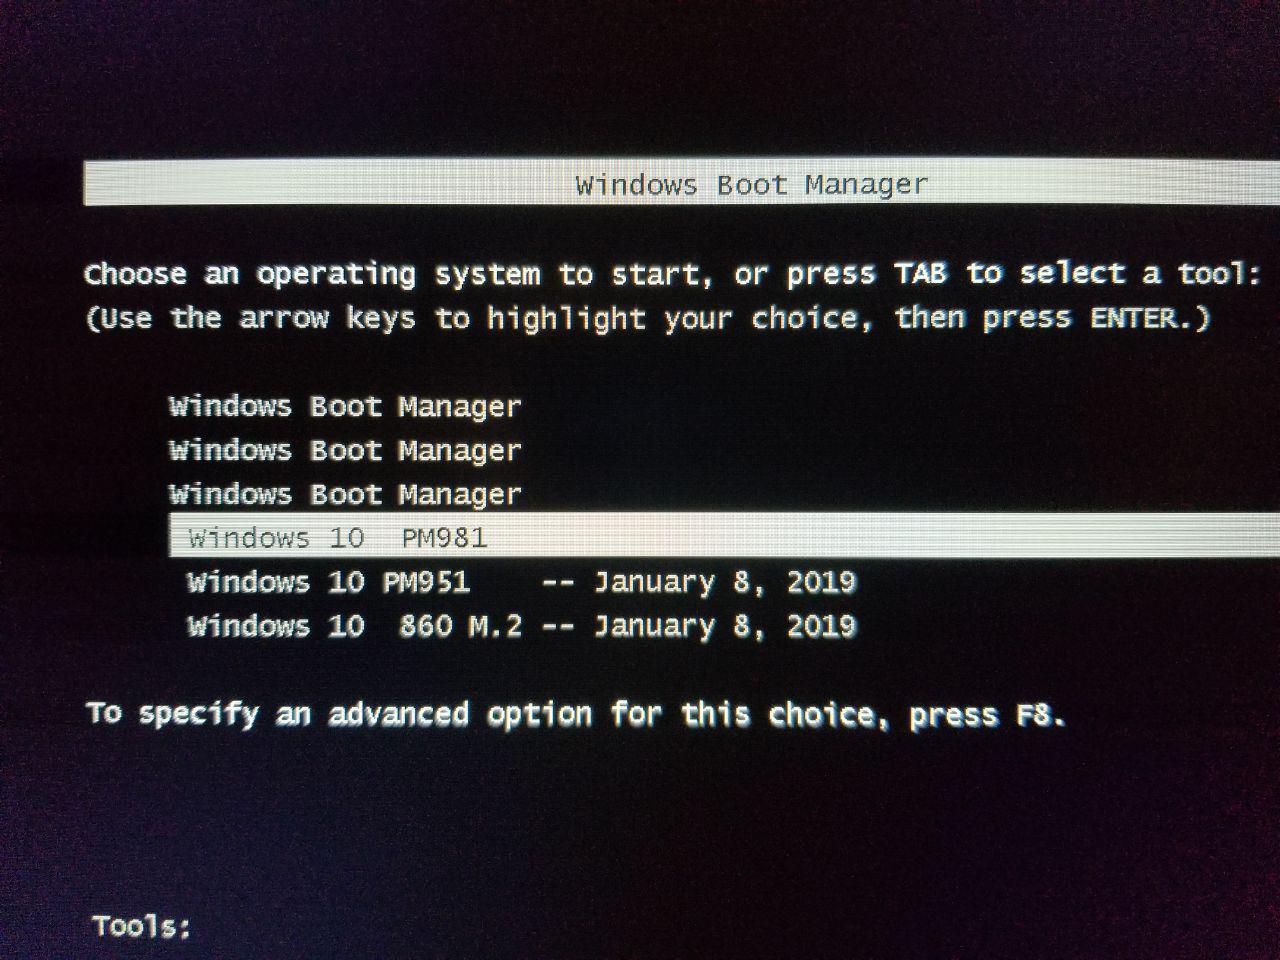 UEFI boot order of disks is not correct m2QmFPt.jpg